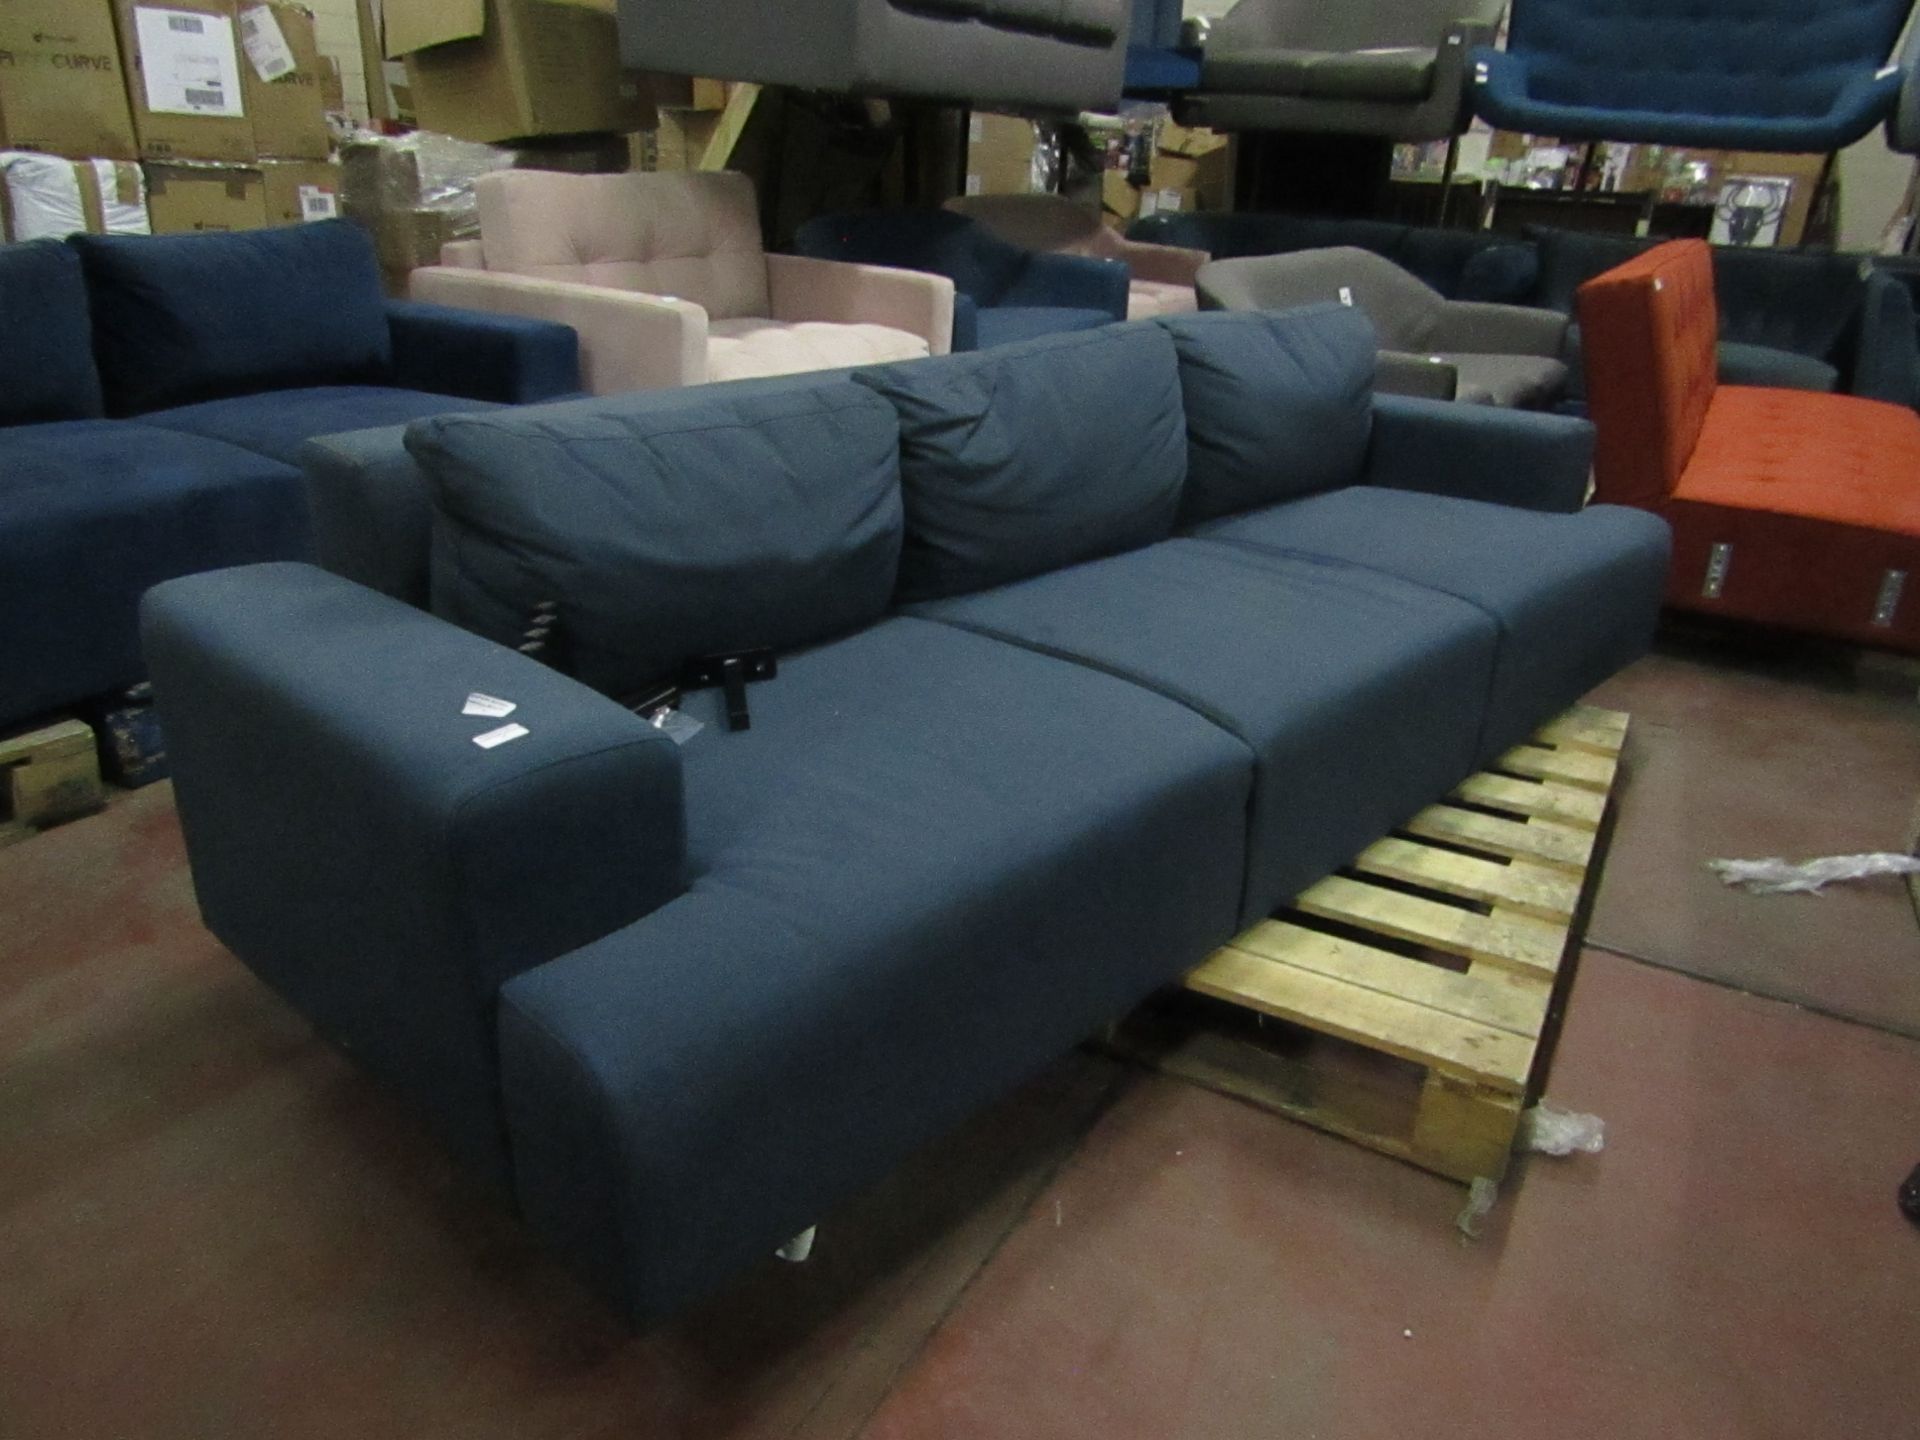 | 1X | MADE.COM FREDERIK 3 SEATER SOFA | AEGEAN BLUE | RRP £579 | GOOD CONDITION & COMES WITH FEET |